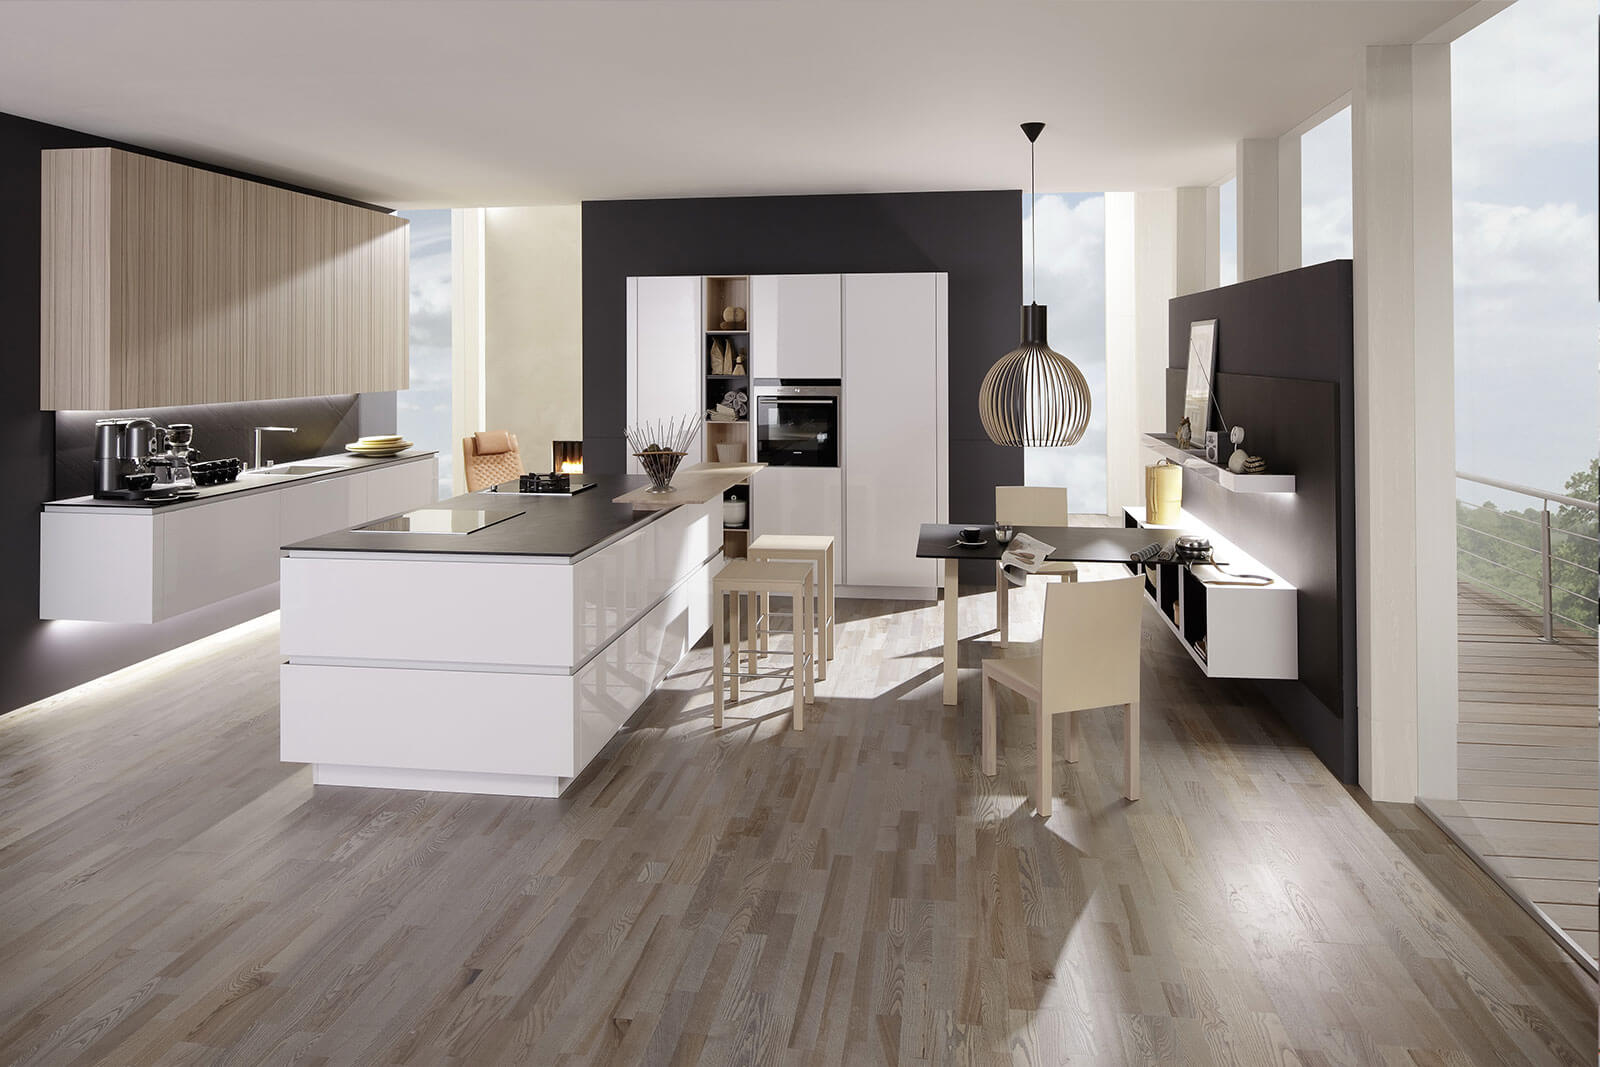 Deson Kitchens | High Quality German Kitchens For Property Developers